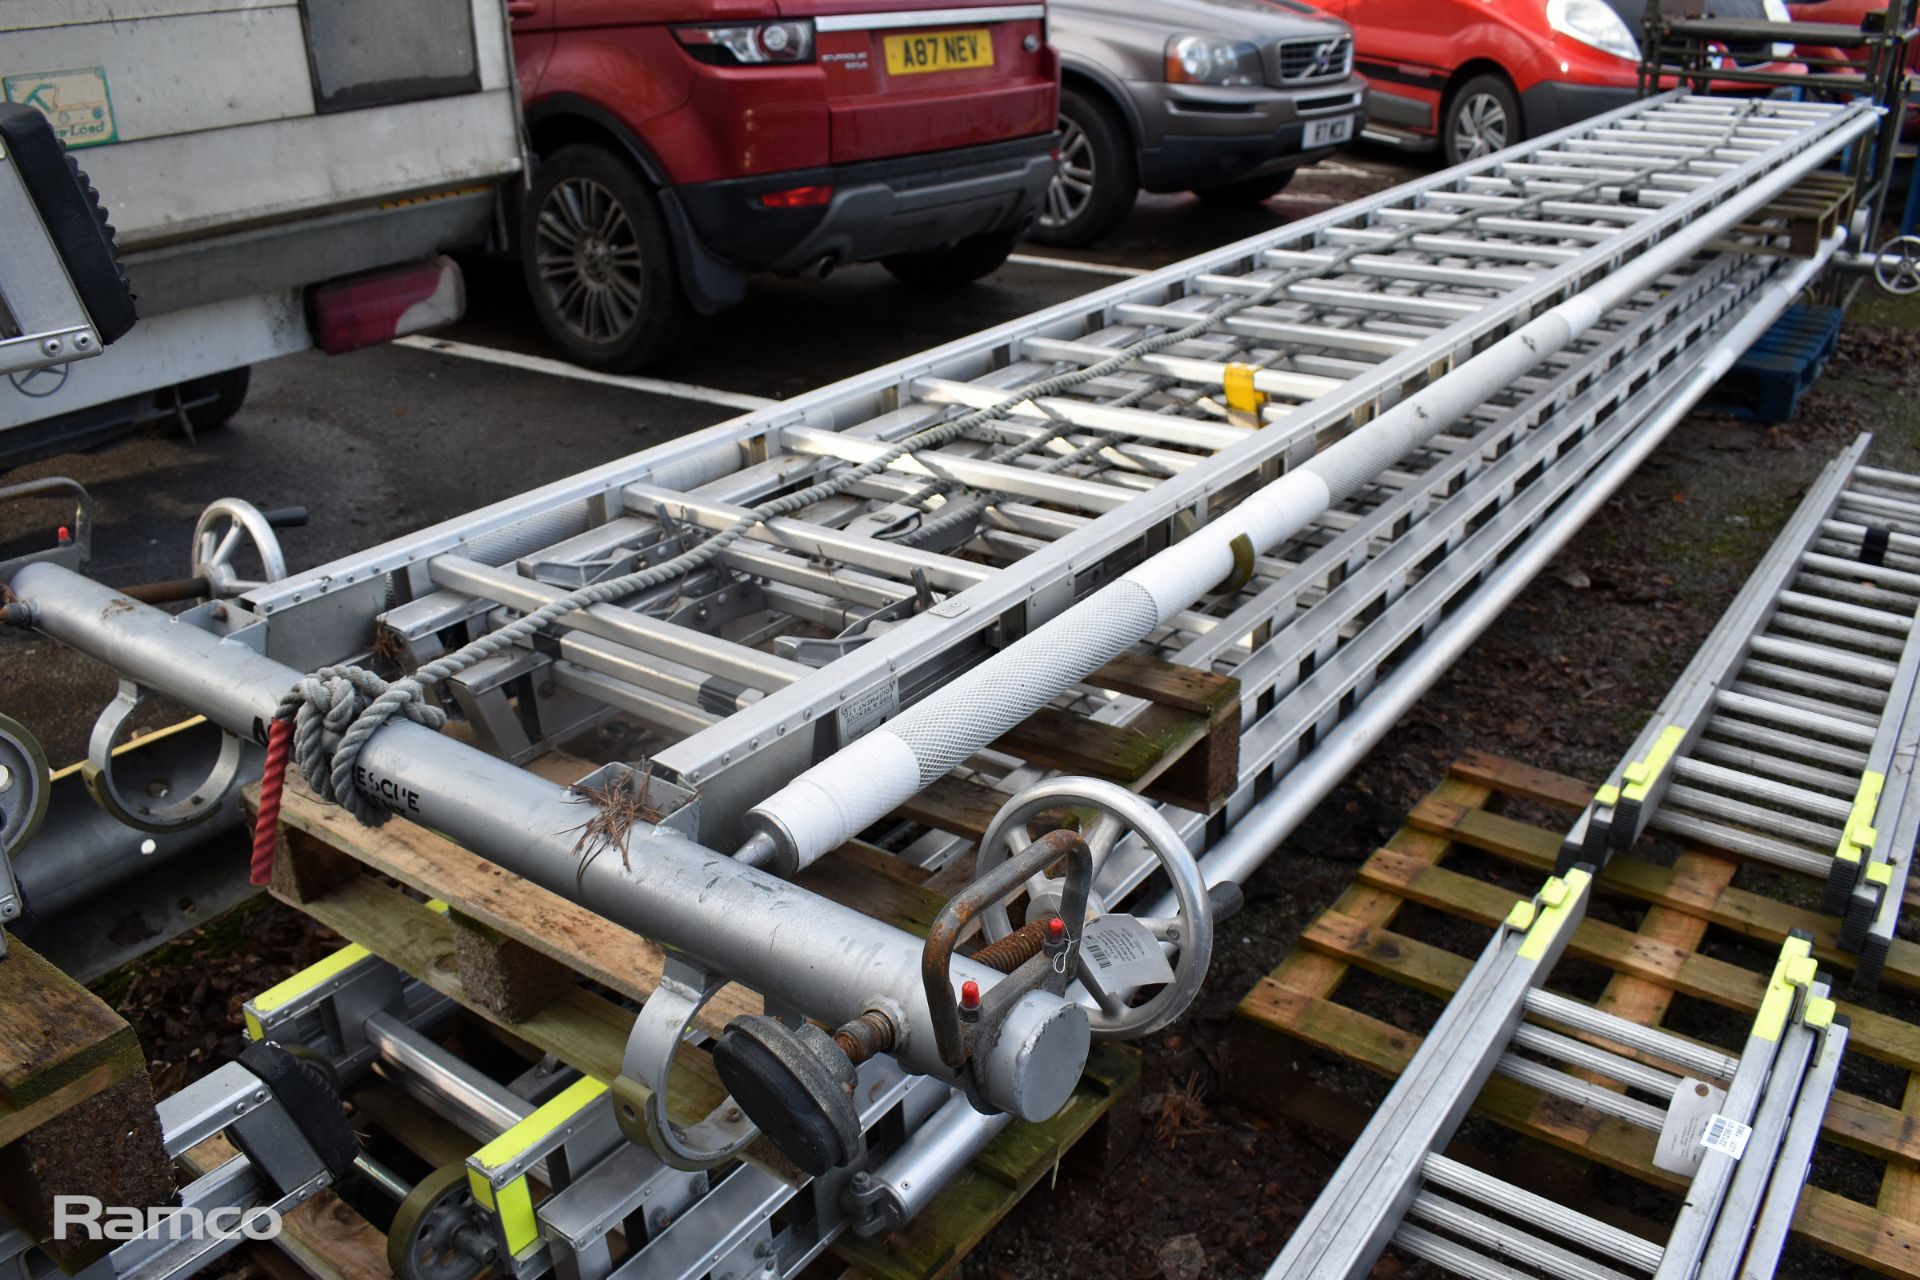 Ex - Fire & Rescue rope-operated triple extension ladder with stabilising support poles - Image 3 of 5